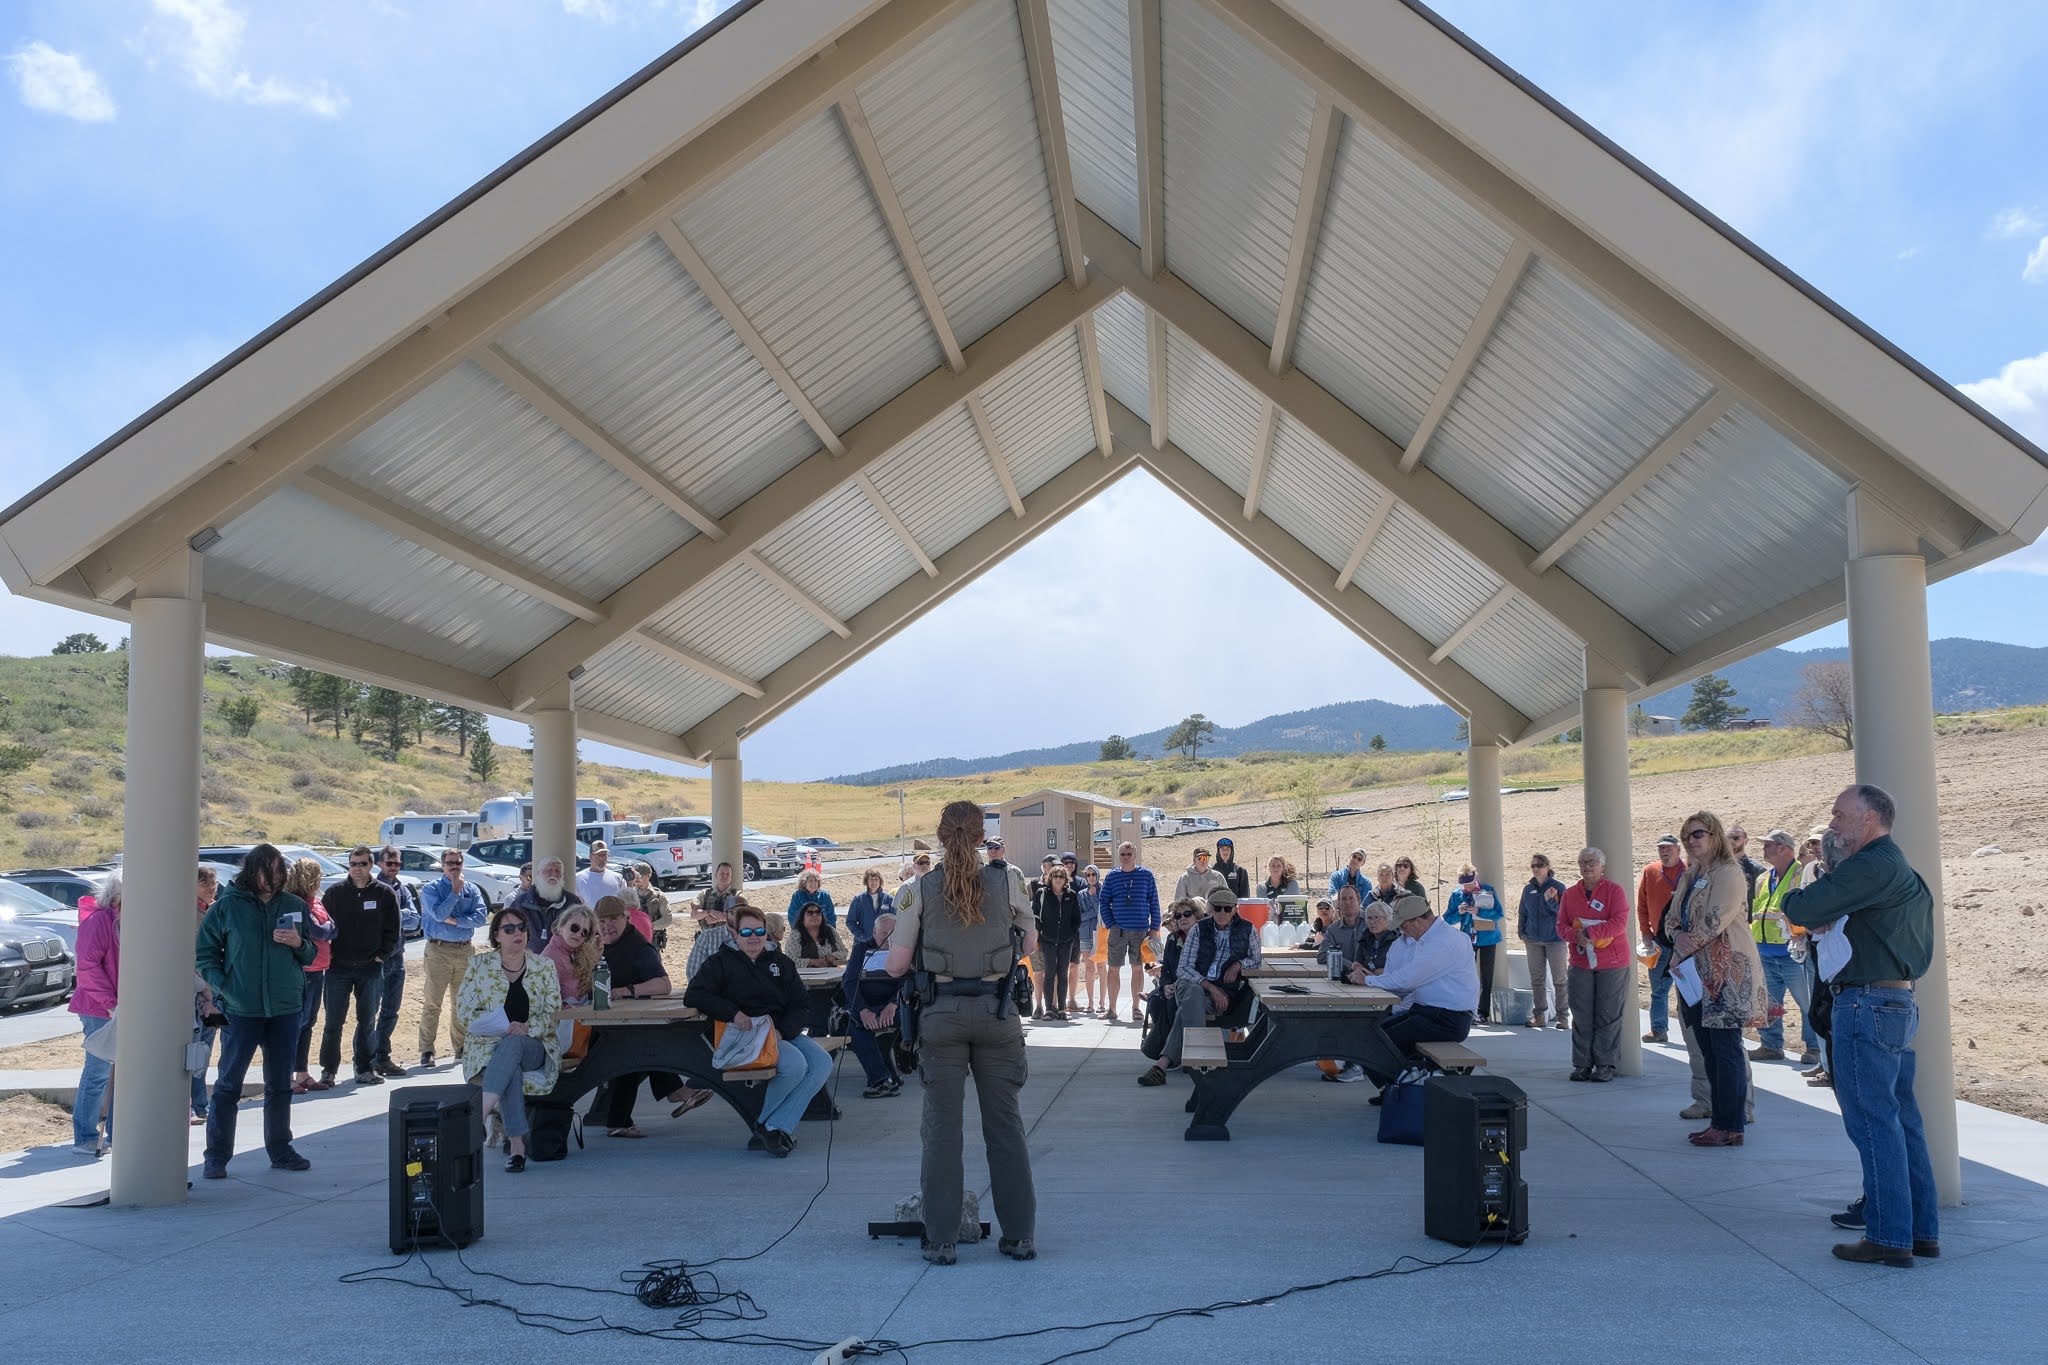 Image 5: Cindy Claggett, Carter Lake District Manager, addresses the crowd at the Sky View Campground ribbon cutting May 12, 2022.